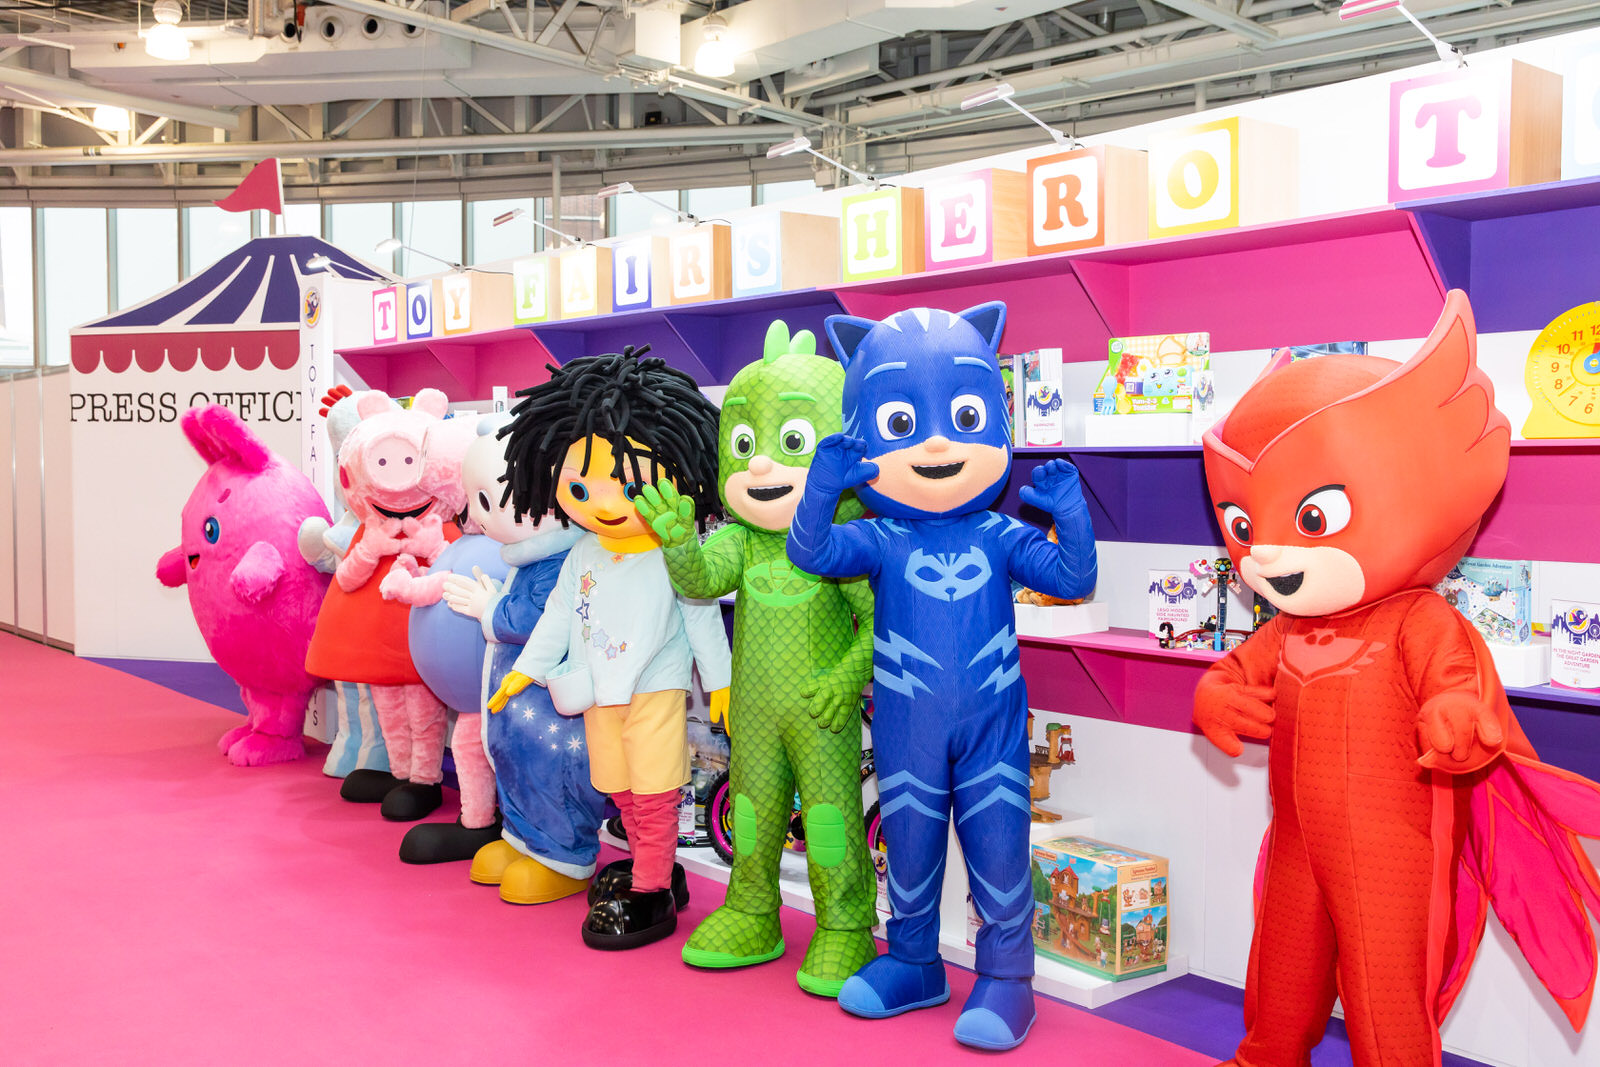 Toy Fair 2022 Exhibition space nearly sold out ahead of its big return